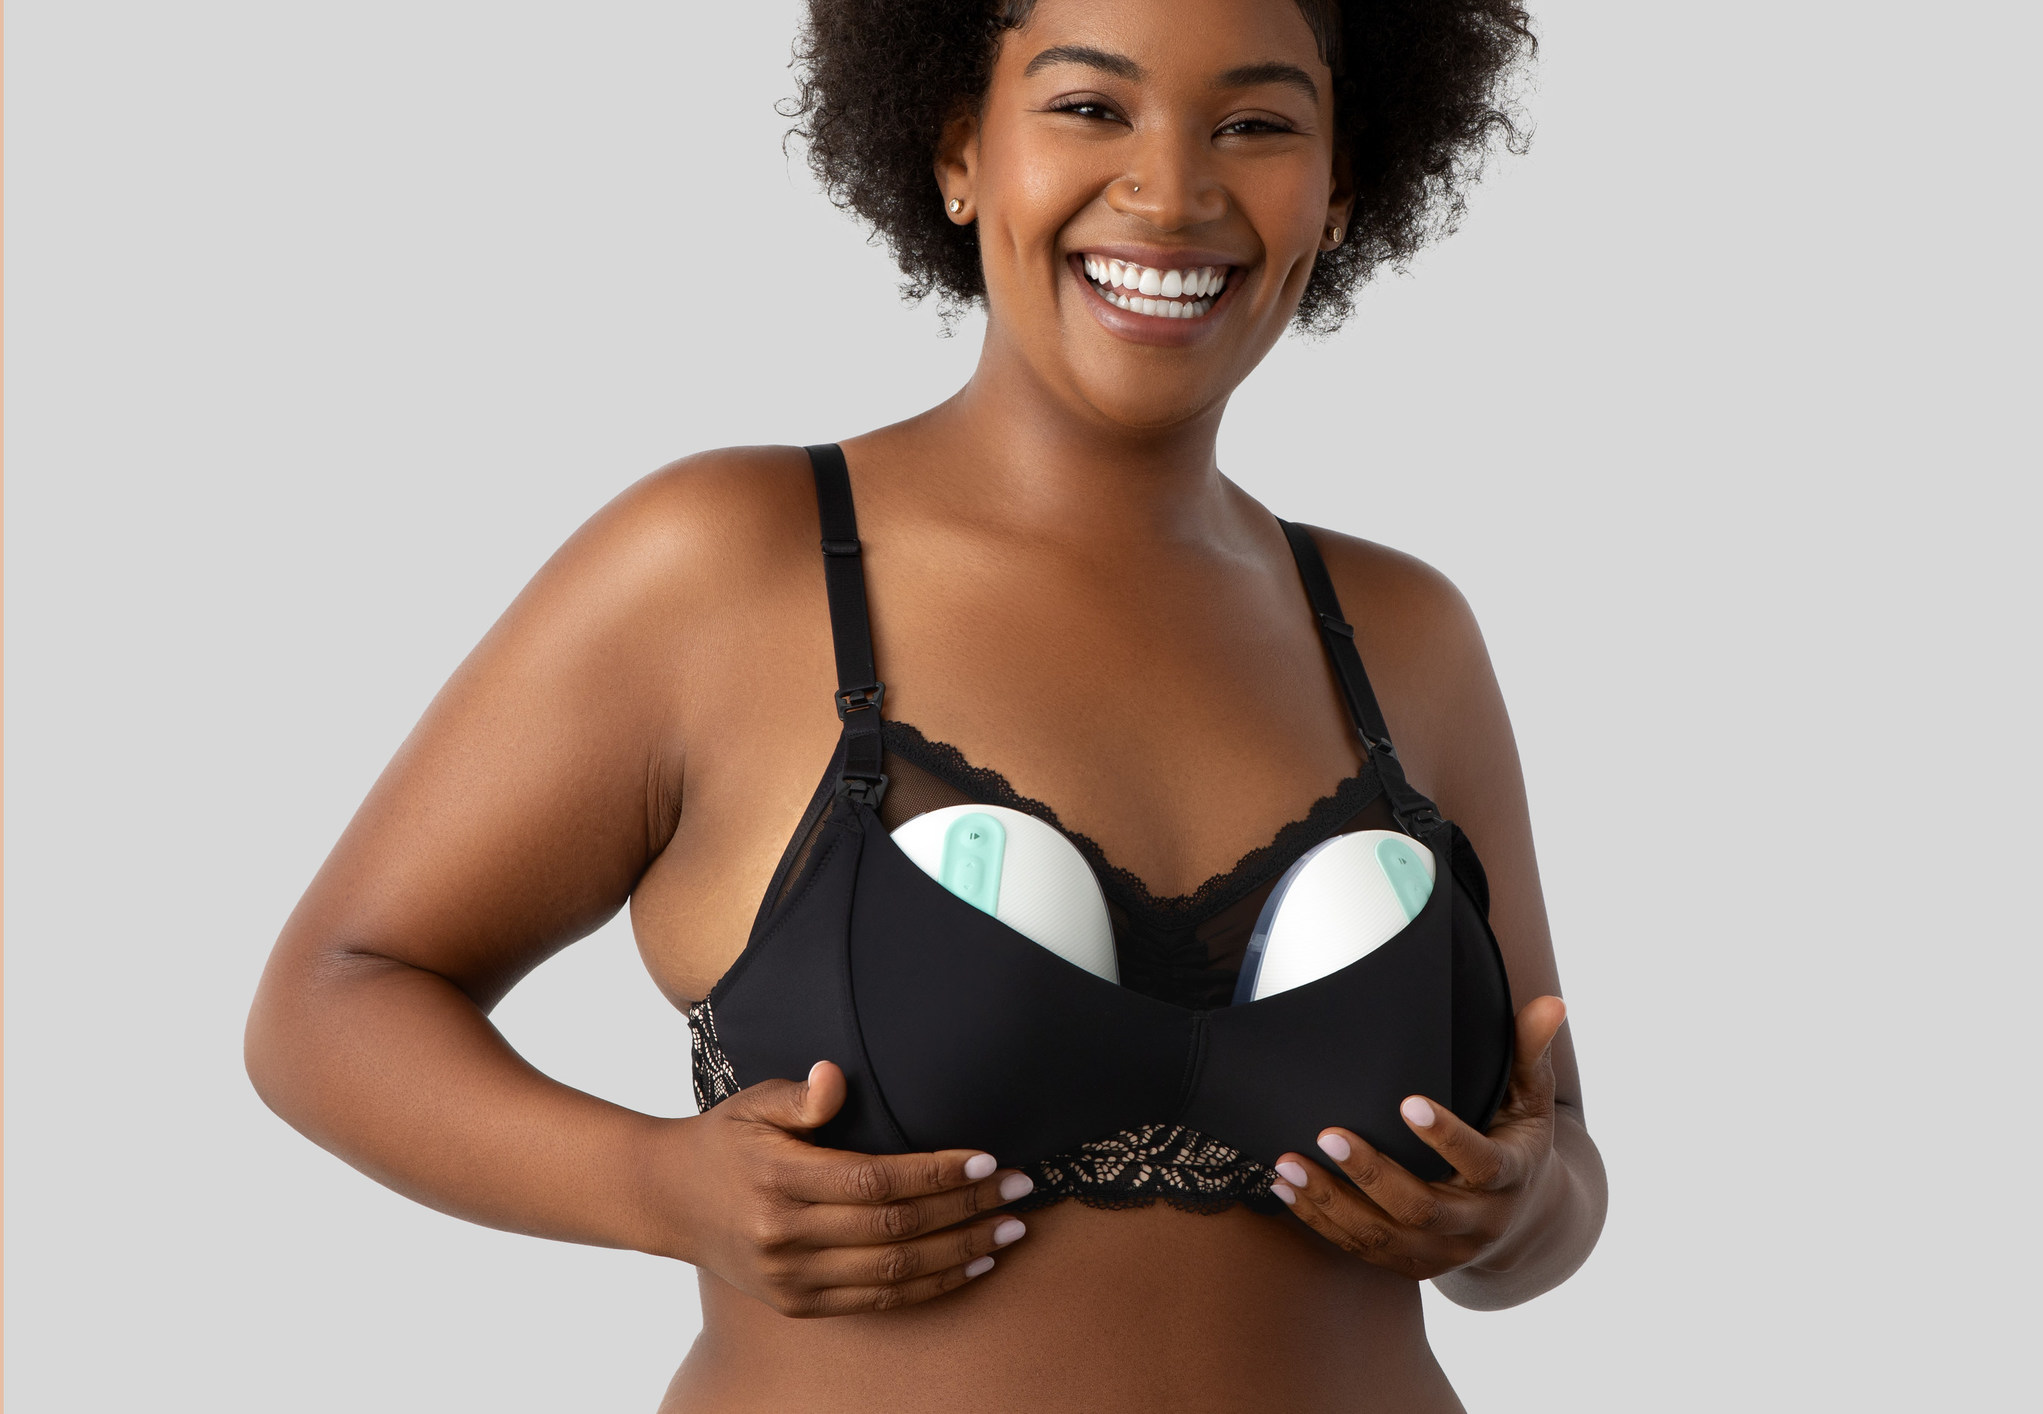 Willow® Introduces the Perfect Pumping Bra to Give Moms Ultimate Support  When Pumping with Willow